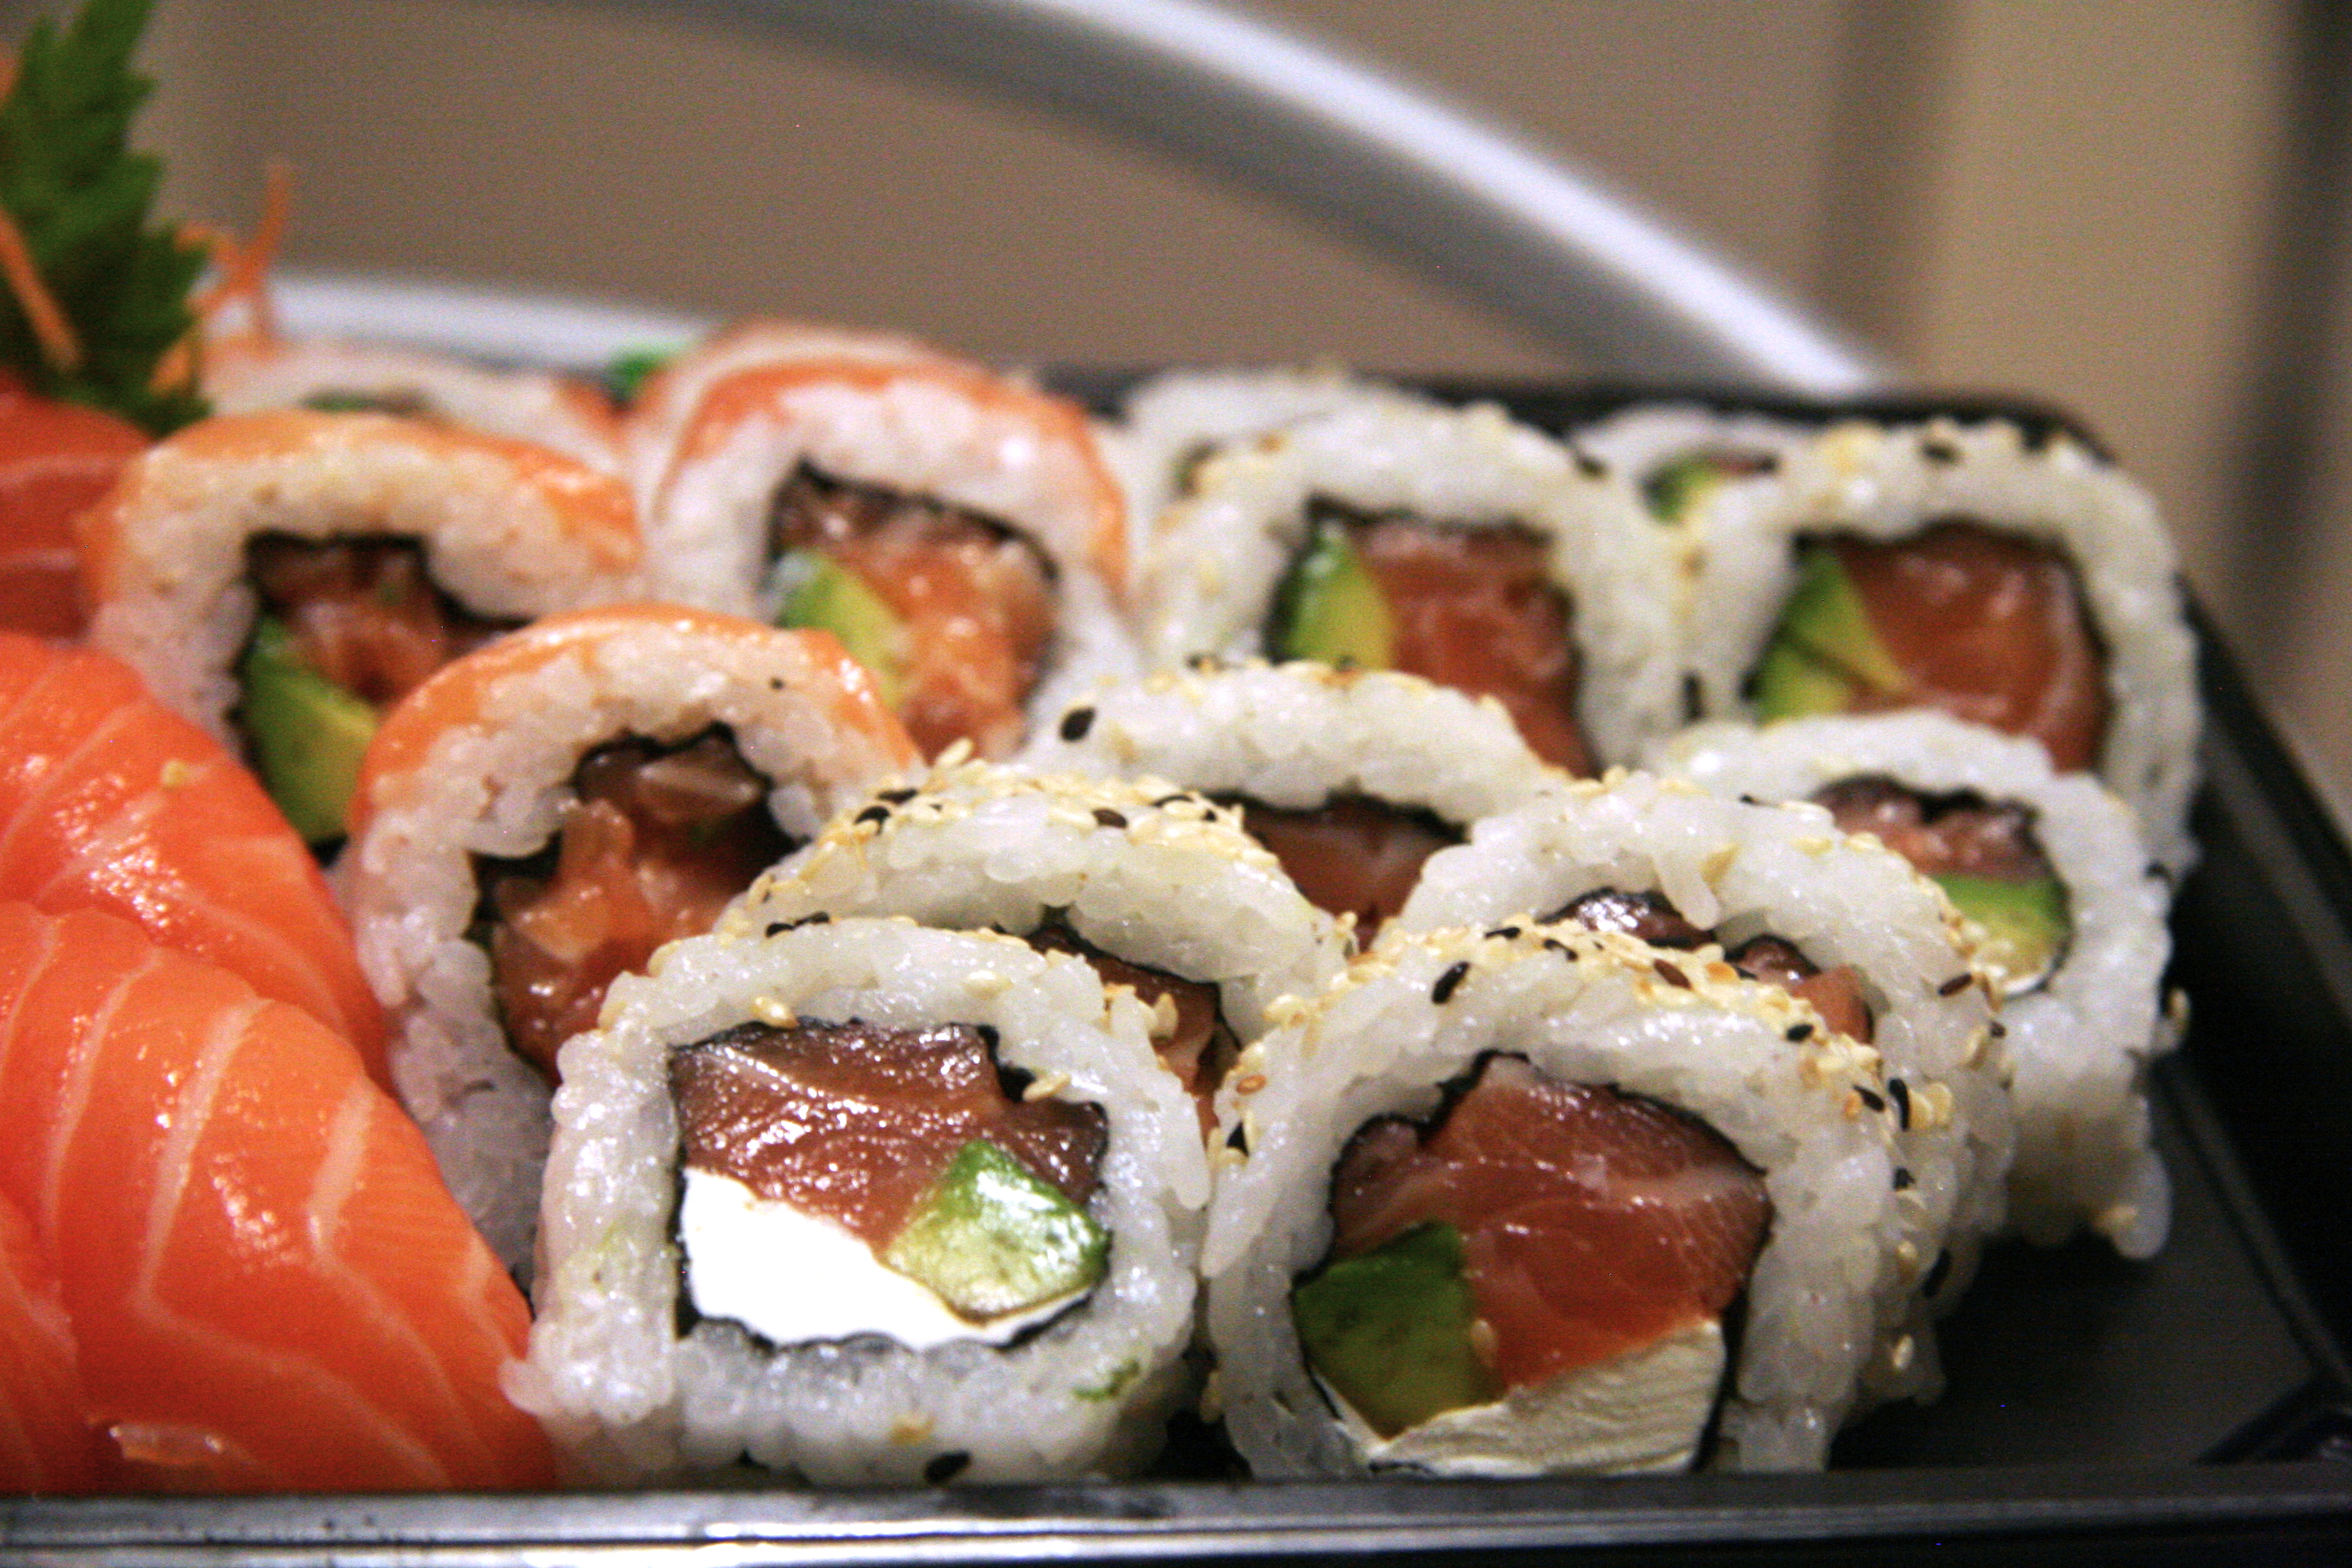 Sushi Delivery: Kokoro Sushi - Pick Up The Fork